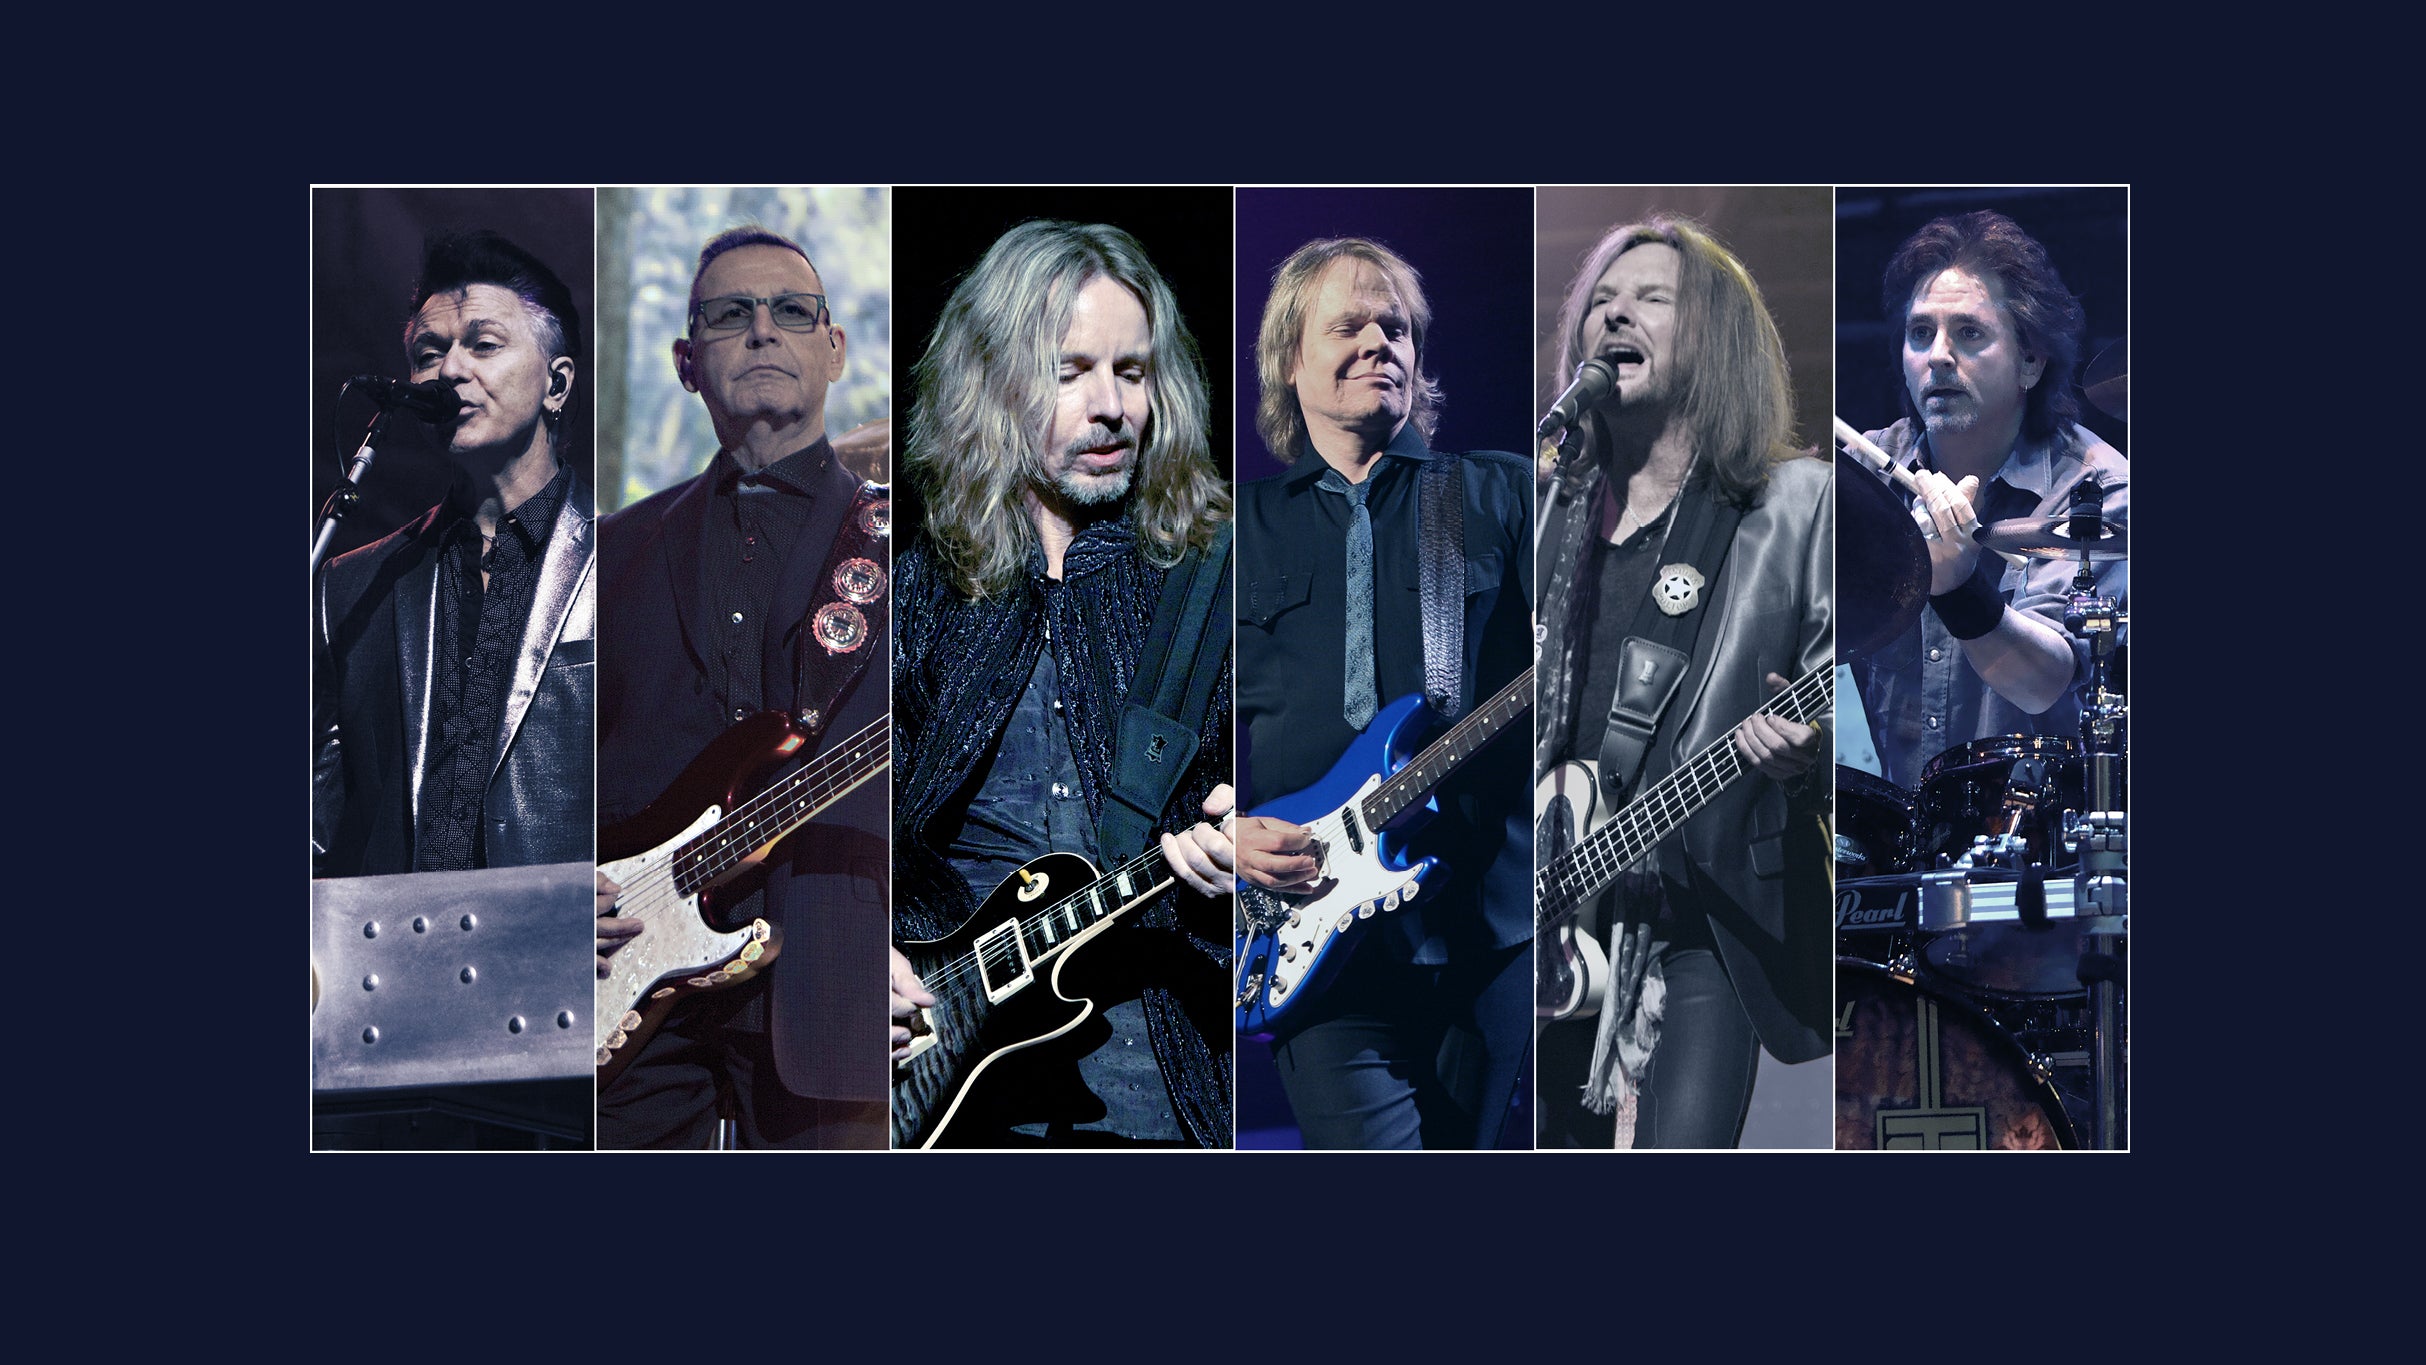 Styx pre-sale password for show tickets in Binghamton, NY (Visions Veterans Memorial Arena)